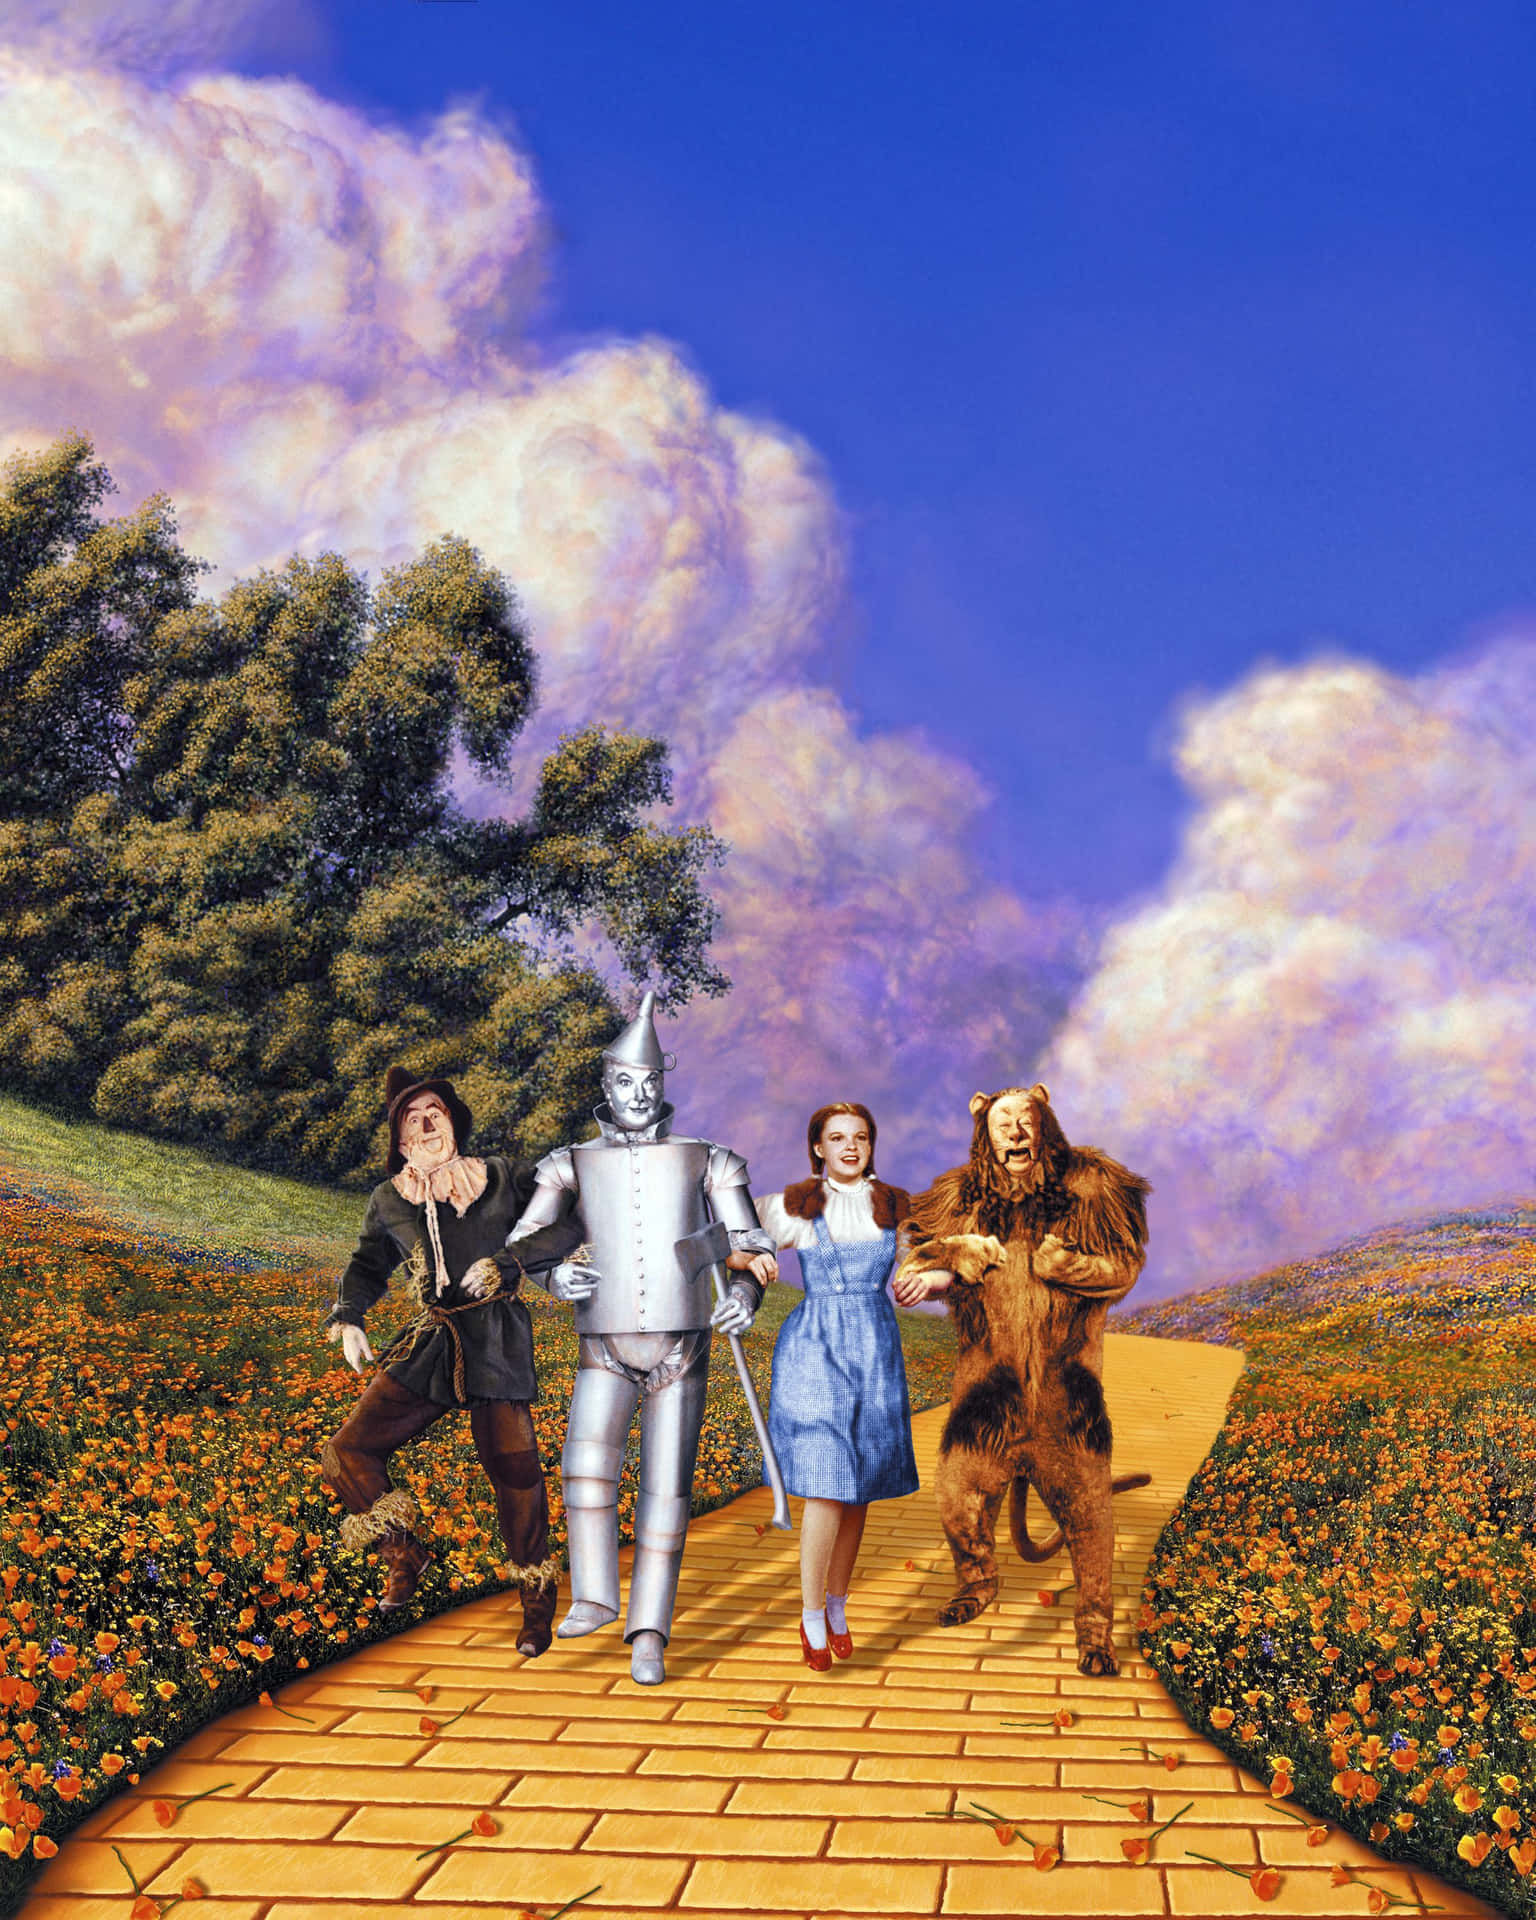 The Wizard Of Oz - A Painting Of The Wizard Of Oz